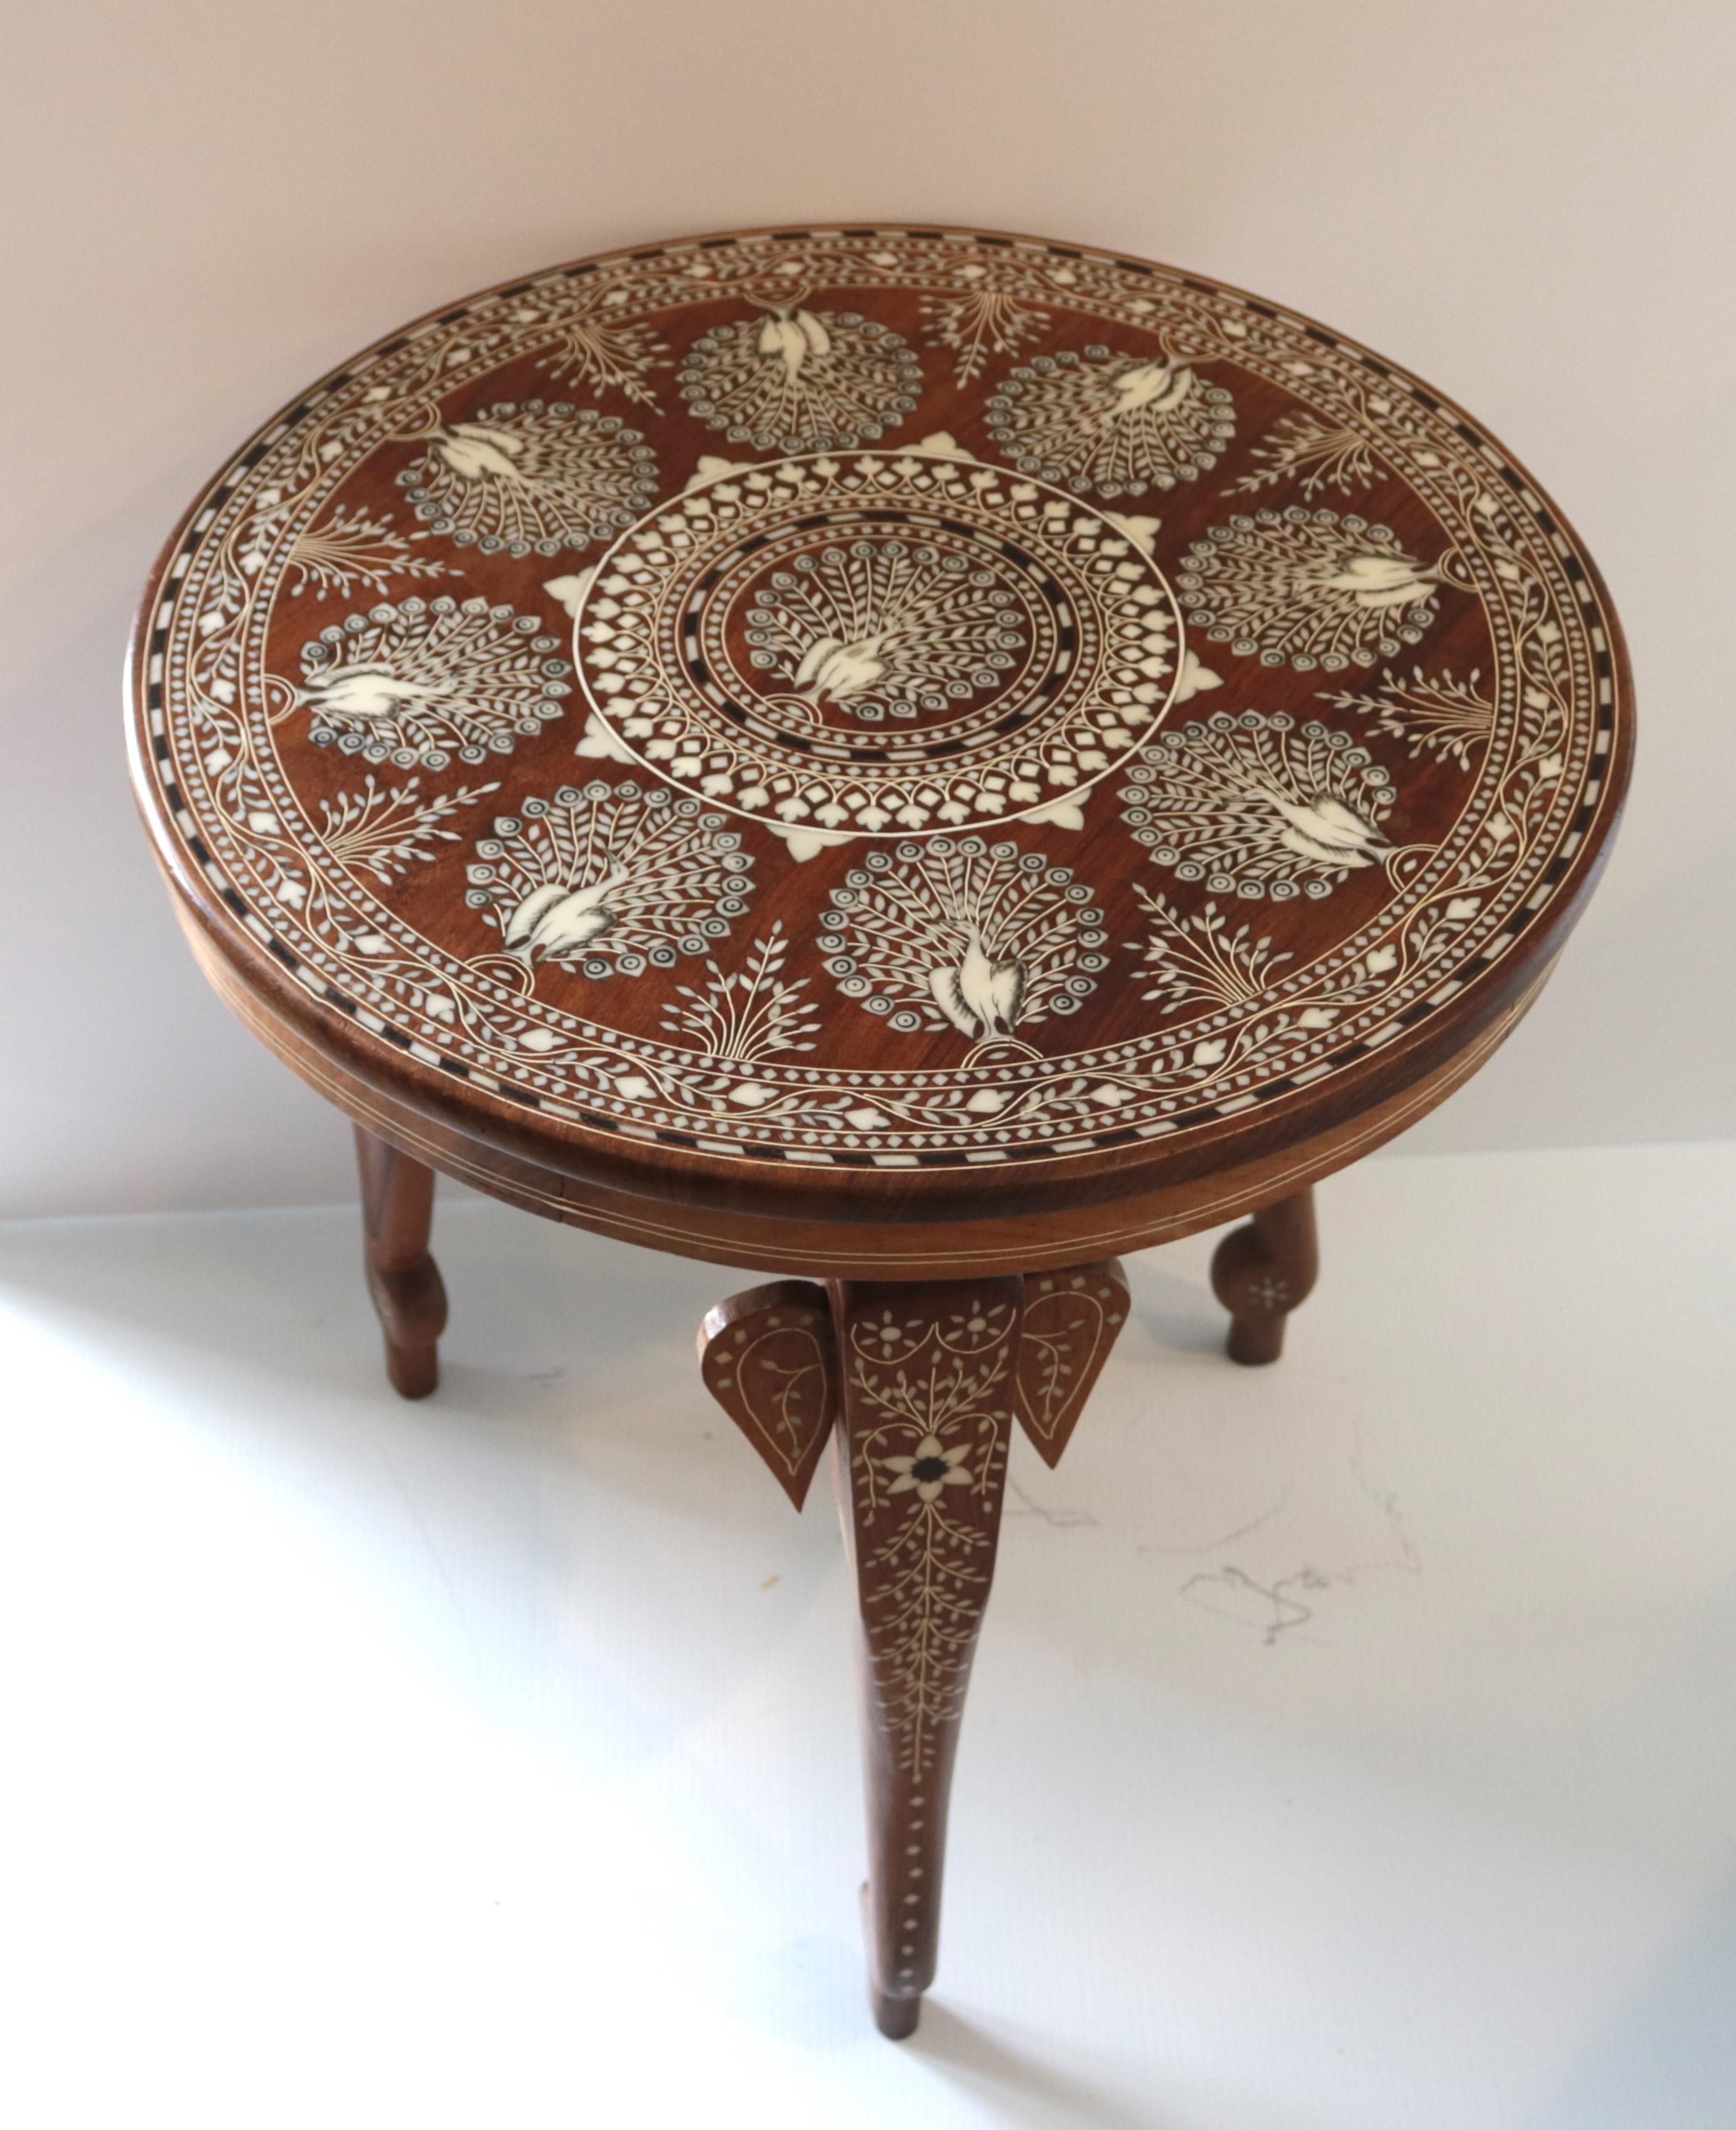 An inspired fine rosewood Anglo-Indian Moorish inlay highly decorative side tables with elephant form legs. Buy one or pair.
late 19th-early 20th century
The tables have circular tops with three legs each, each leg is carved as India elephants